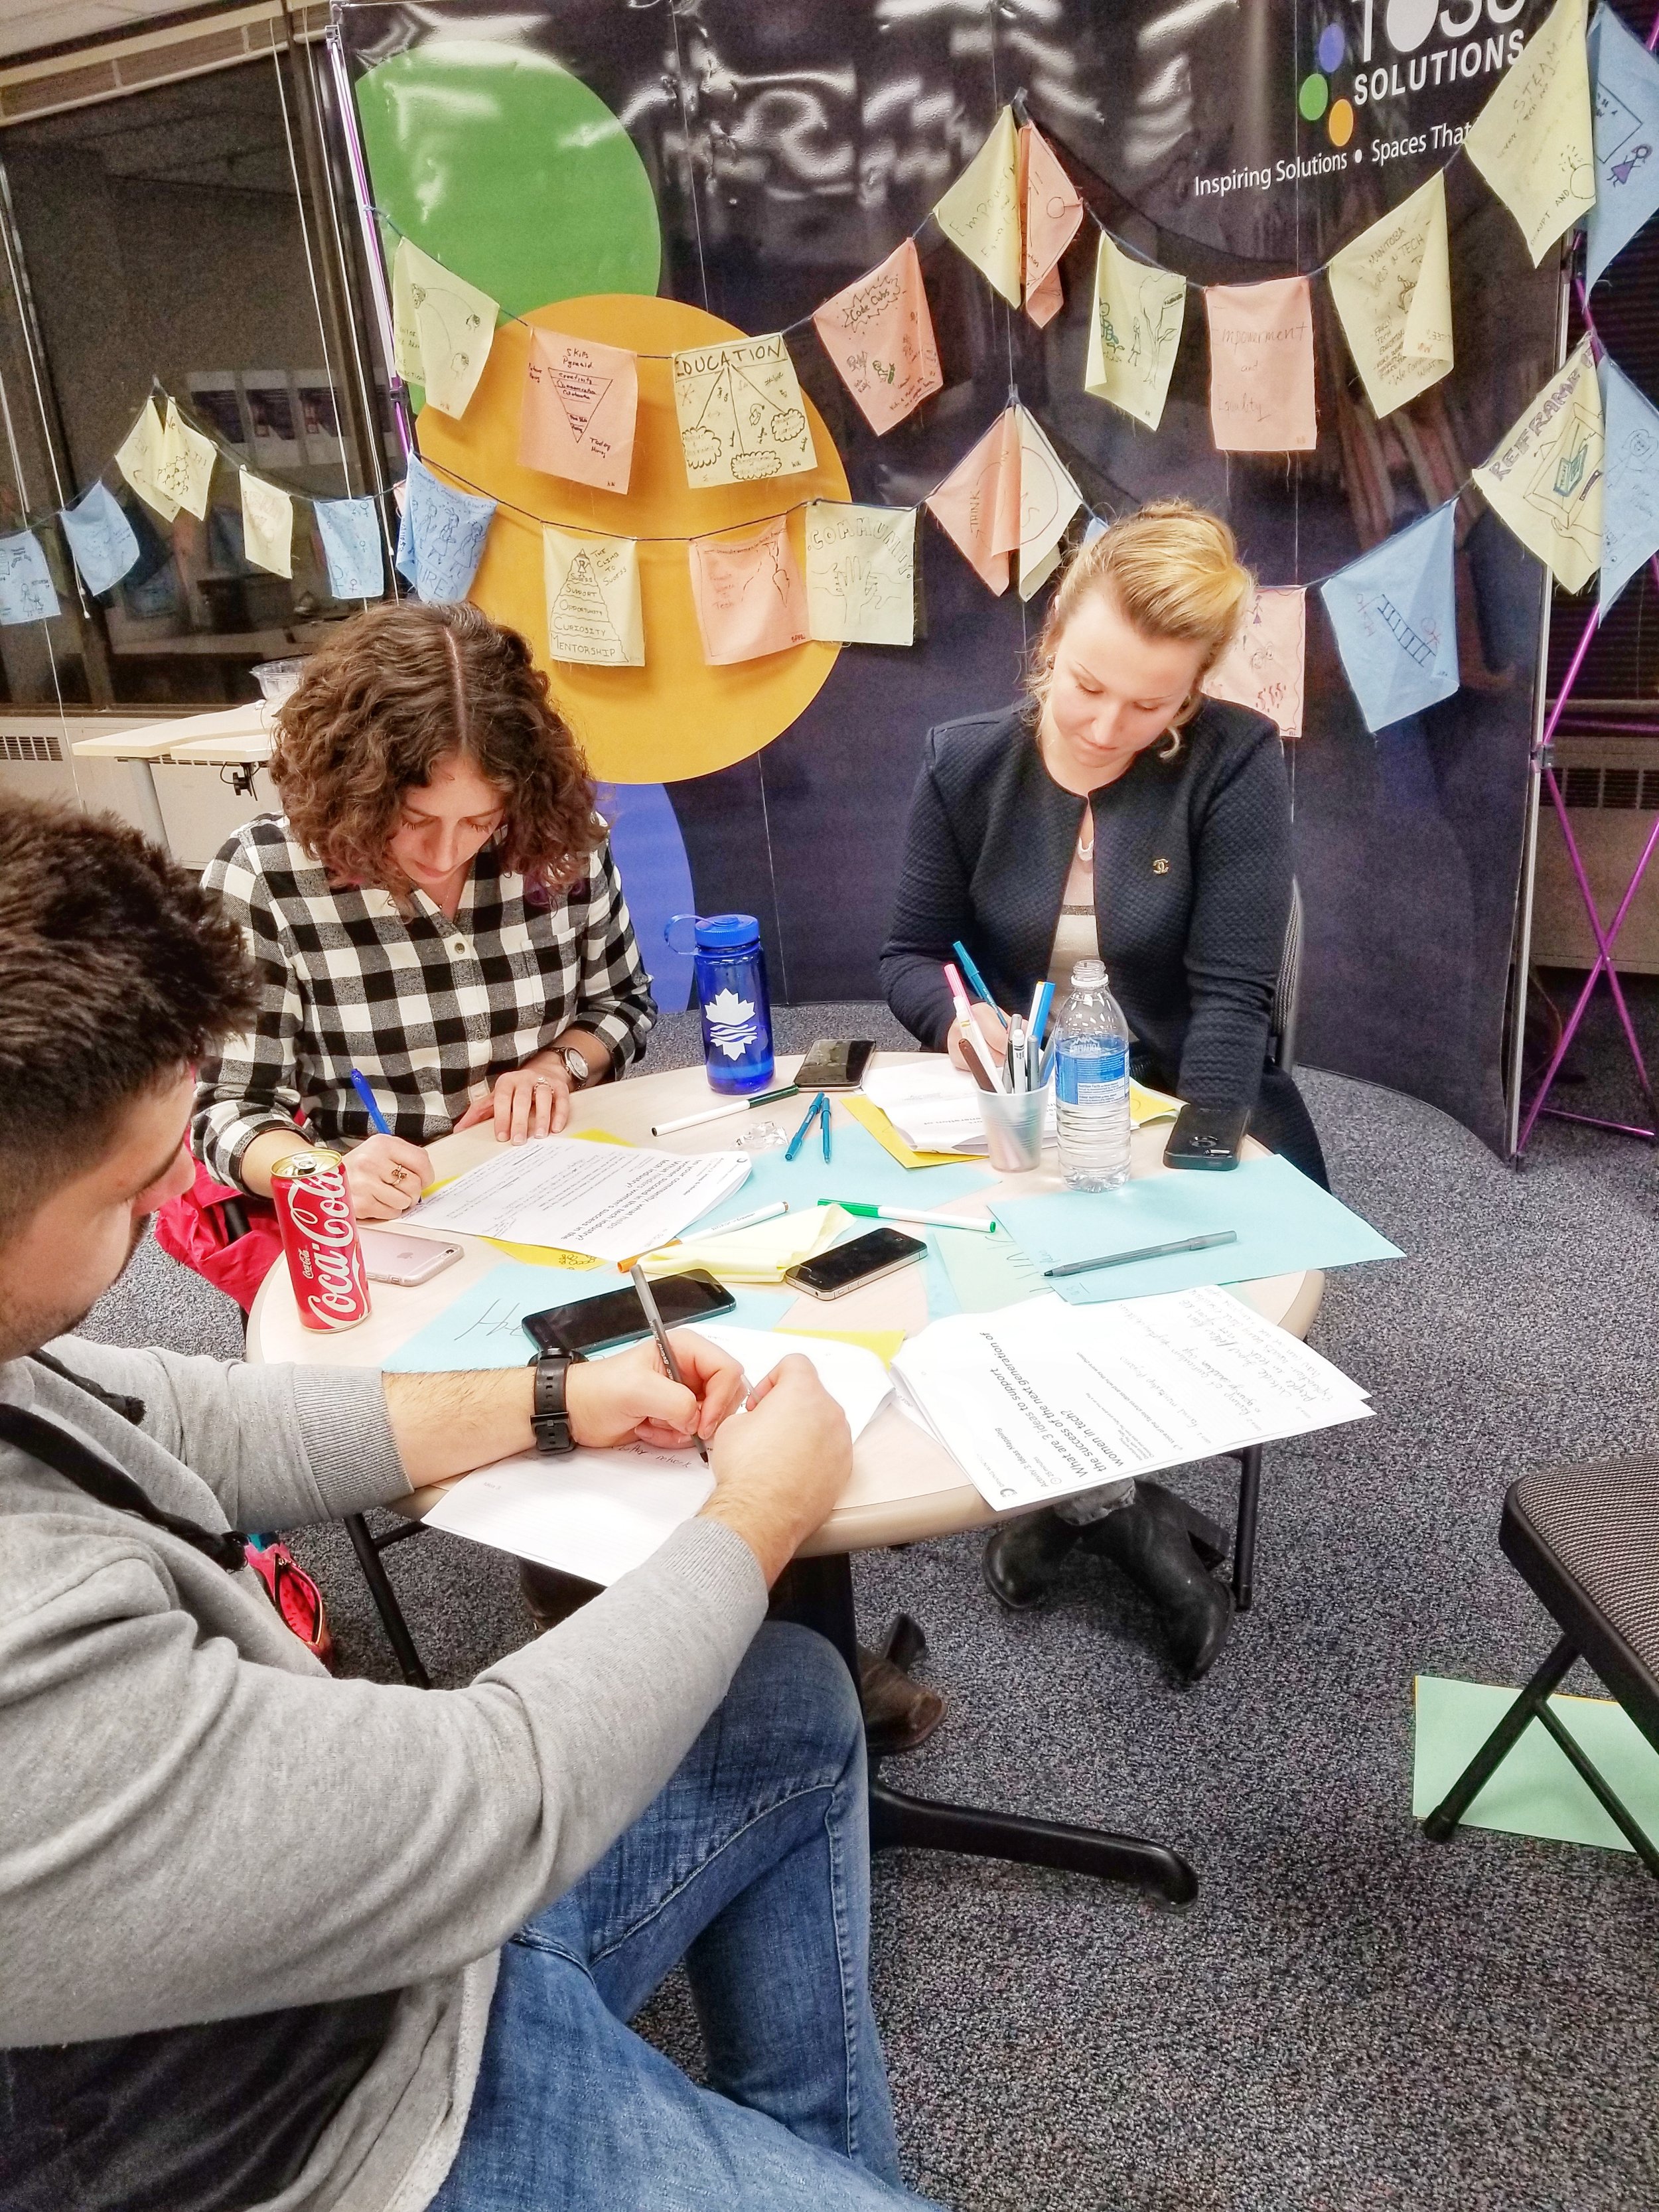  Image is of a group of three people at the St. John’s Community Conversation sitting at a table all writing something down on the worksheets they were provided. 